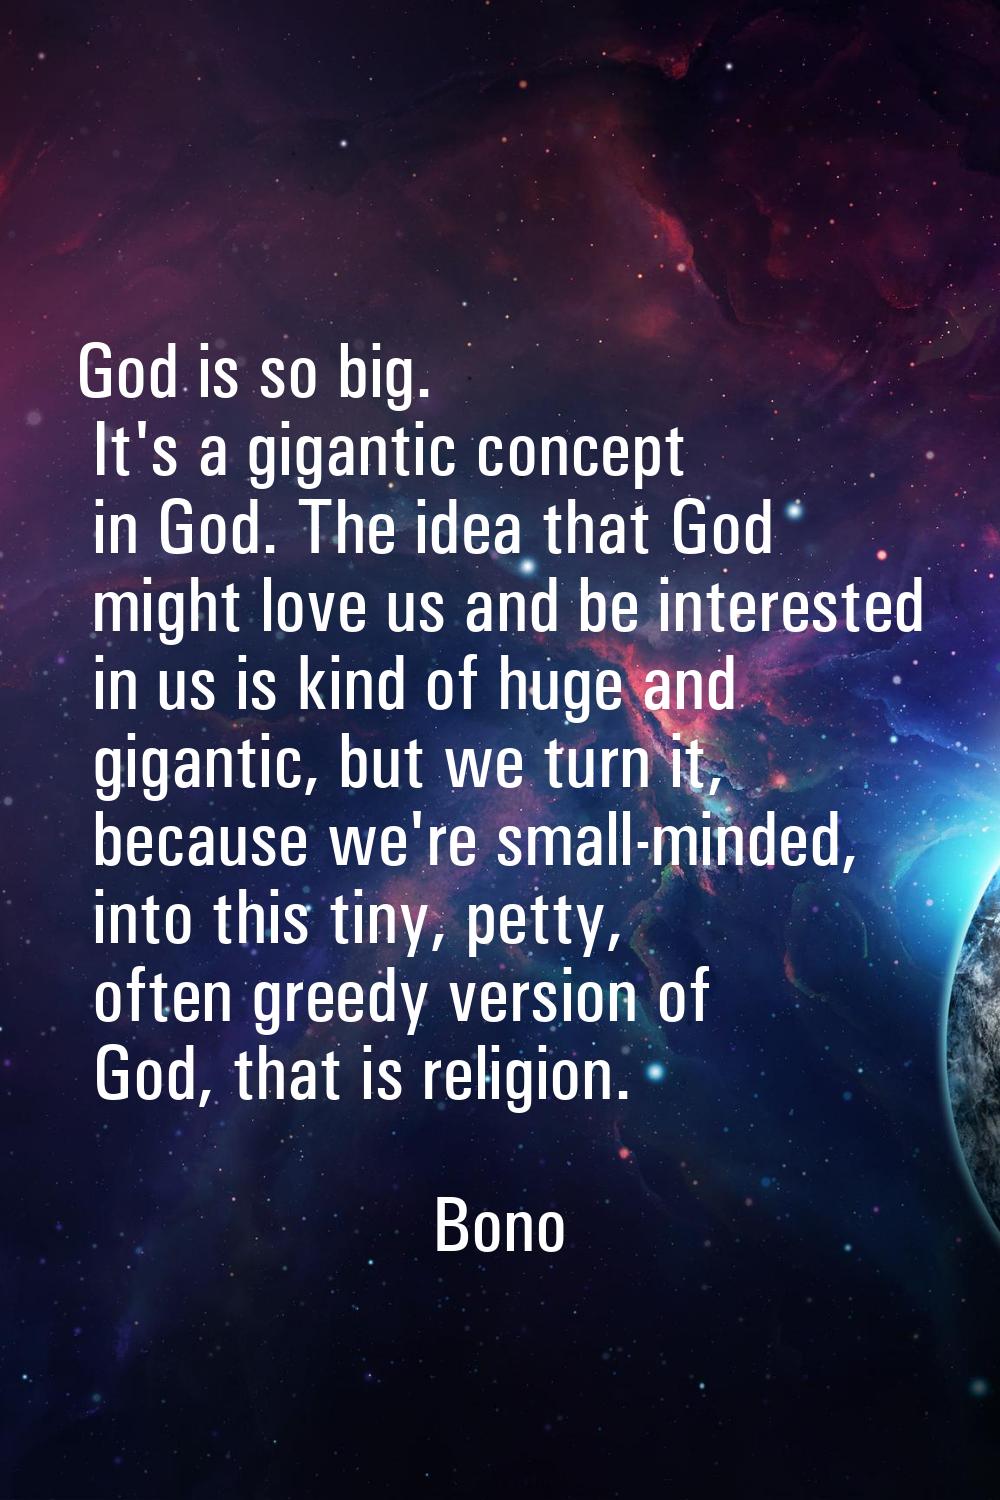 God is so big. It's a gigantic concept in God. The idea that God might love us and be interested in